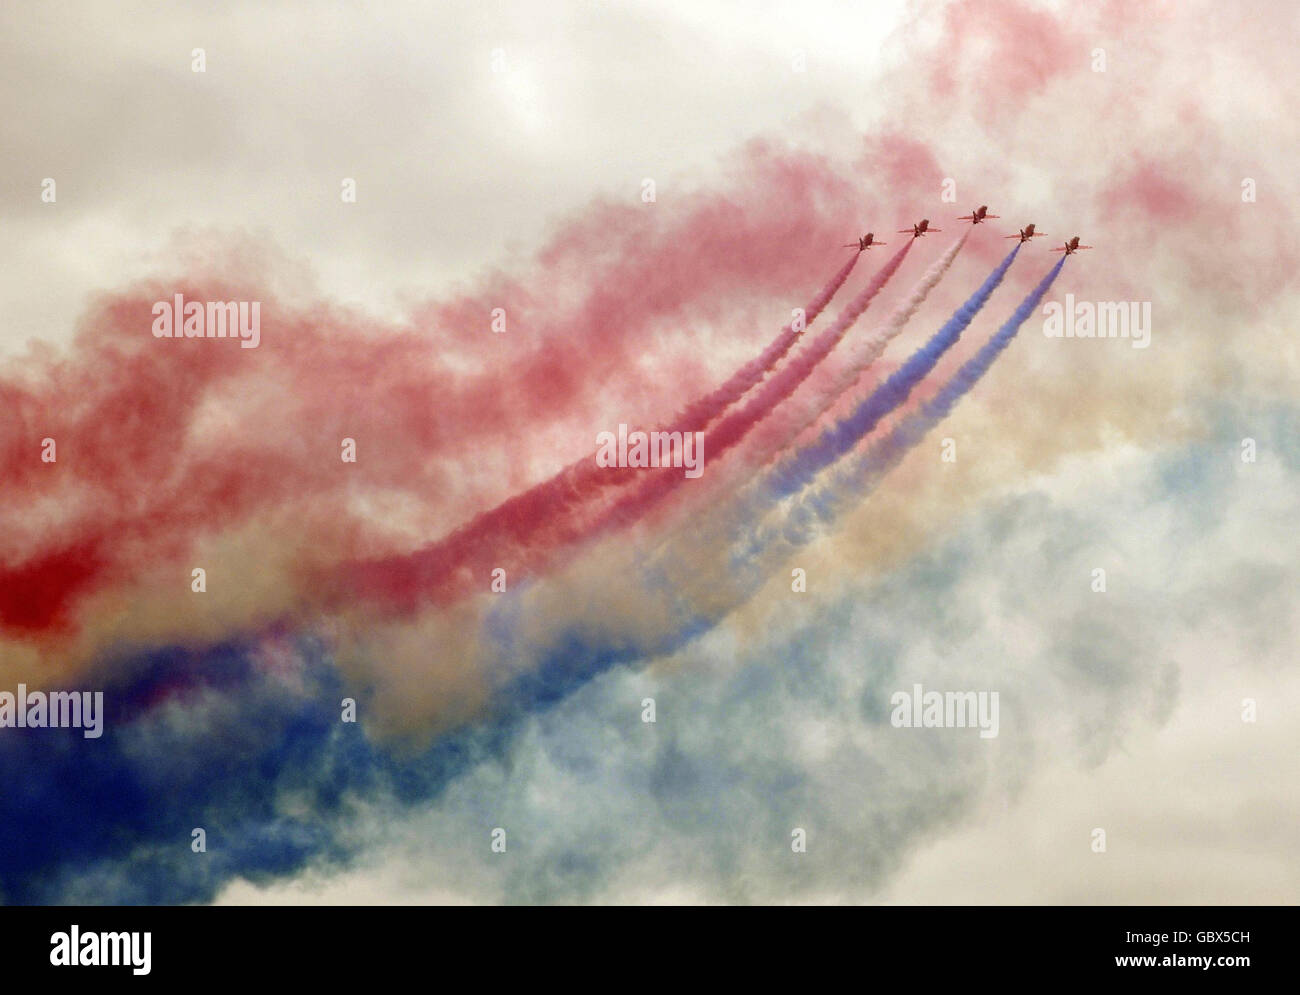 Auto - Goodwood Festival of Speed. The red Arrows fly overhead in formation during the Goodwood Festival of Speed in Chichester, West Sussex. Stock Photo